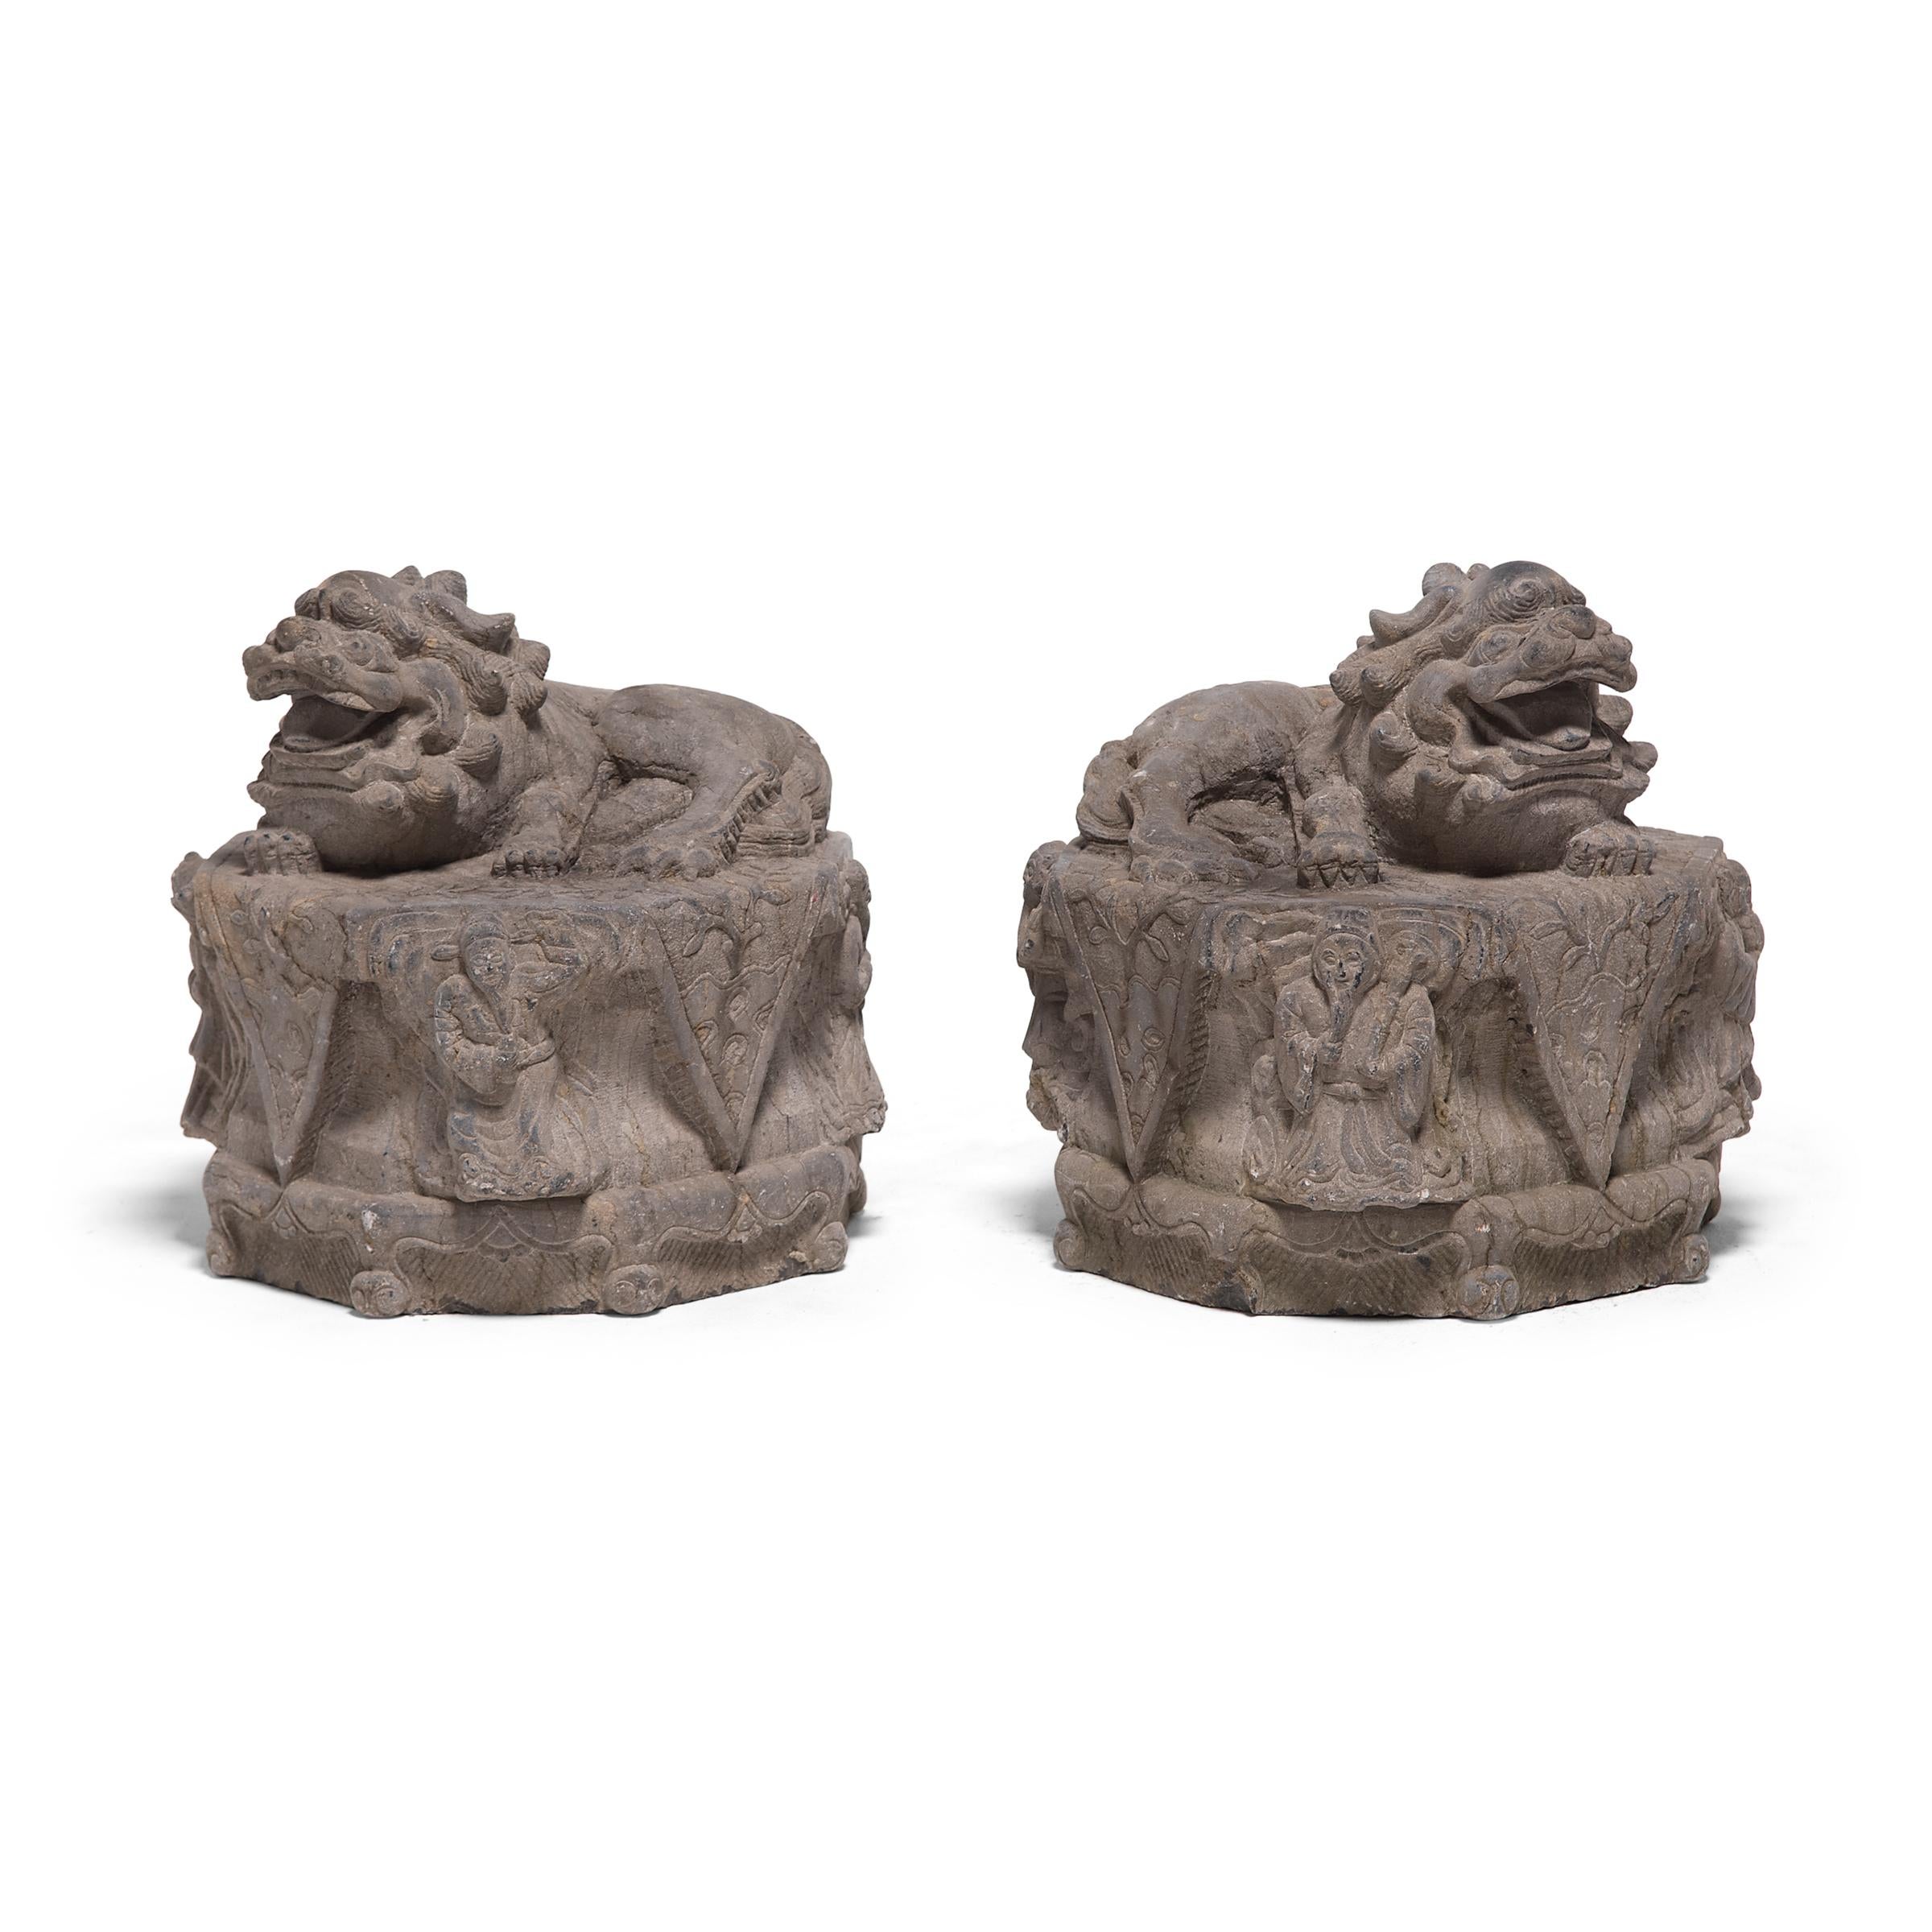 These mid-19th century Chinese Fu dog protectors, each carved by hand from a single block of limestone, once guarded the entrance to a Provincial Chinese residence. They feature mirror depictions of relaxed, reclining lion dogs with flowing manes